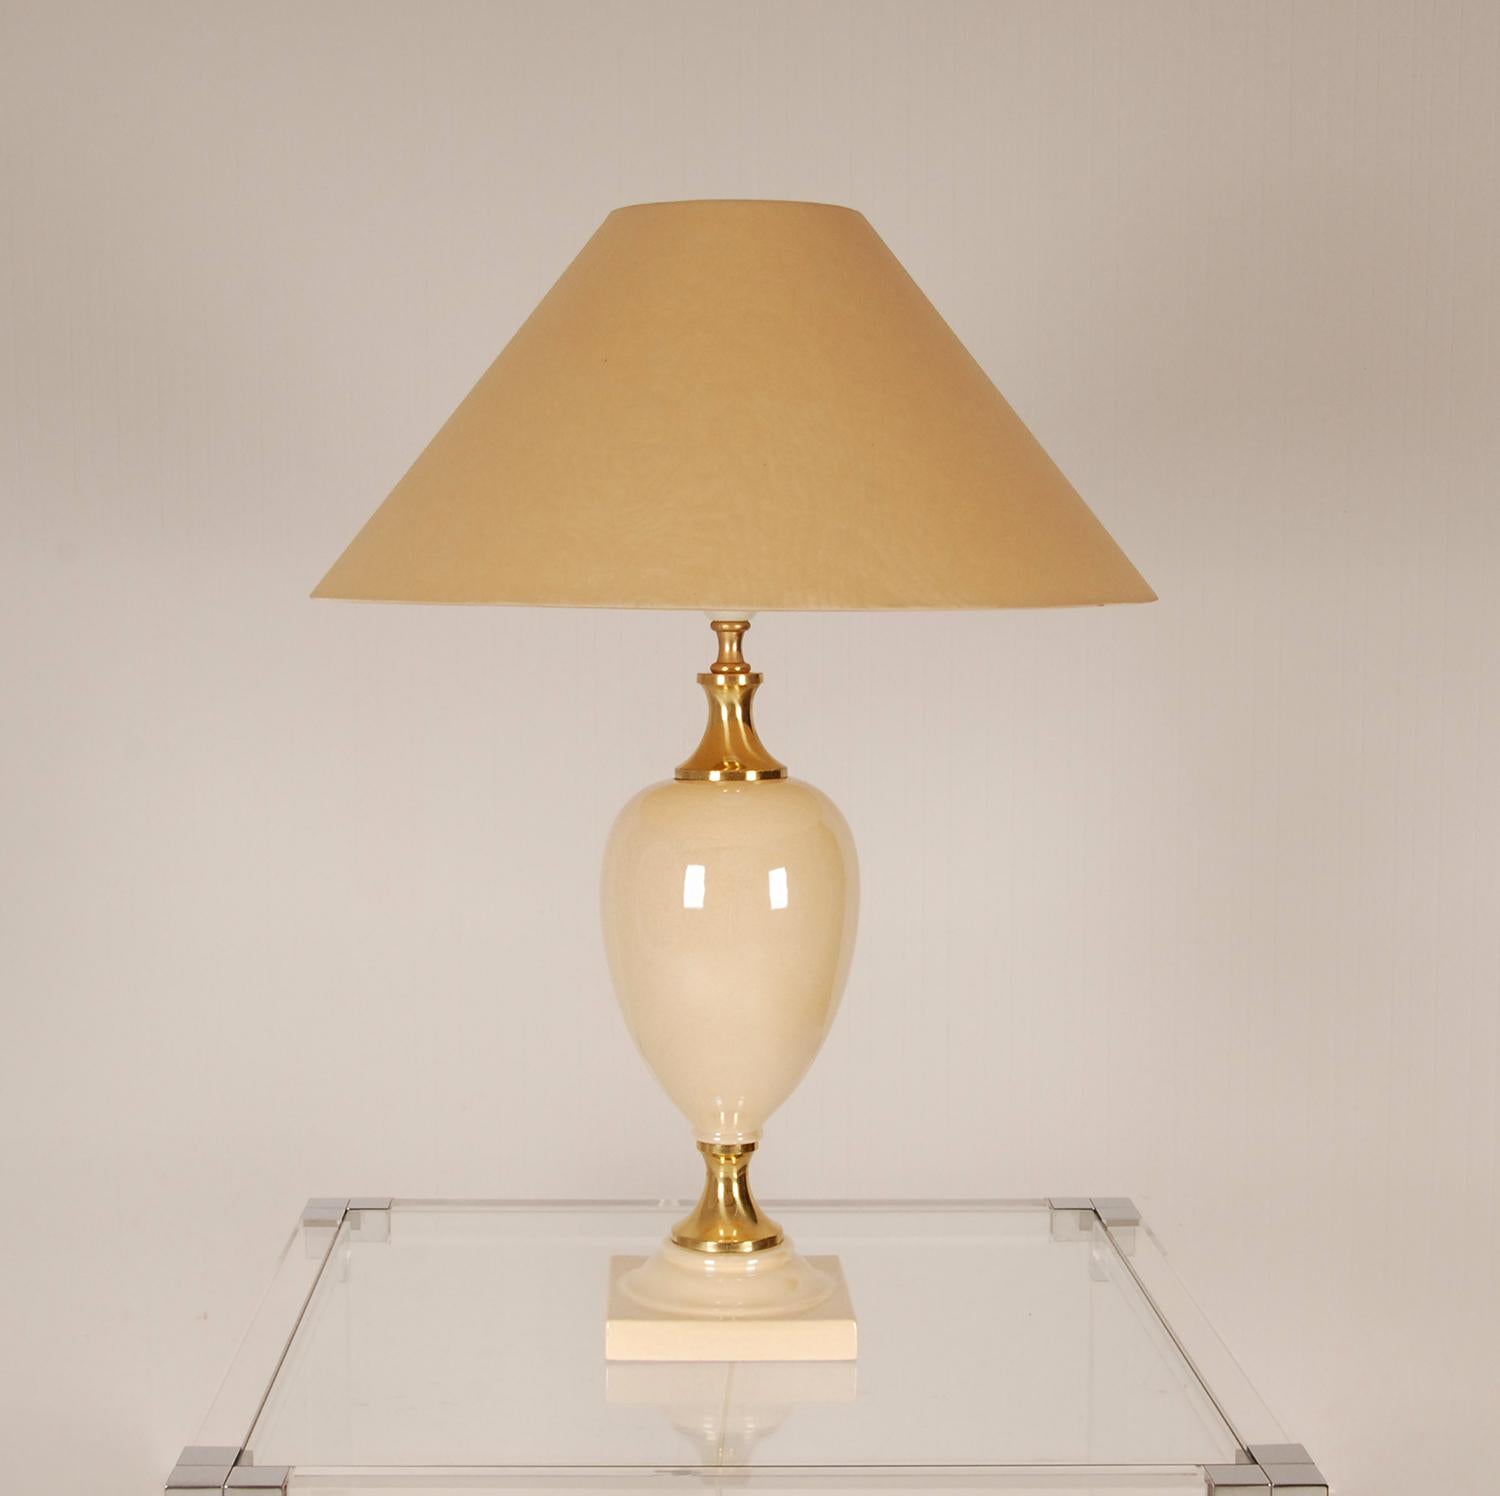 Mid Century 1970s Hollywood Regency glamorous and luxorious table lamp 
The lamp has an egg-shaped belly made of porcelain and a square foot
The belly rests on a brass stem and thee holder.
Colors: Gold and Champagne lustre glaze ( mother of